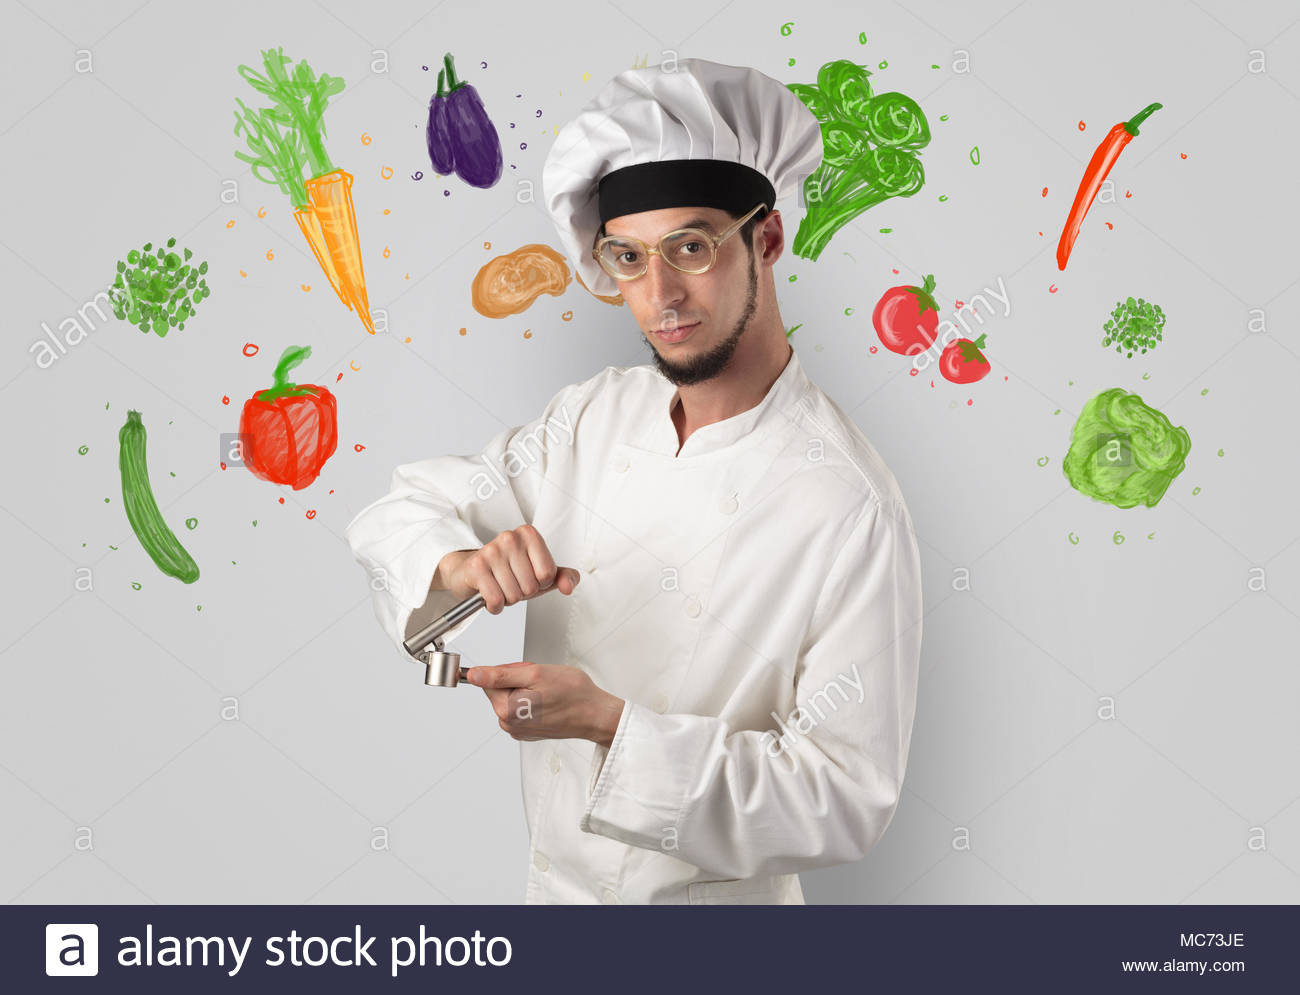 Bearded Cook With Colourful Drawn Vegetables On A White Wallpaper